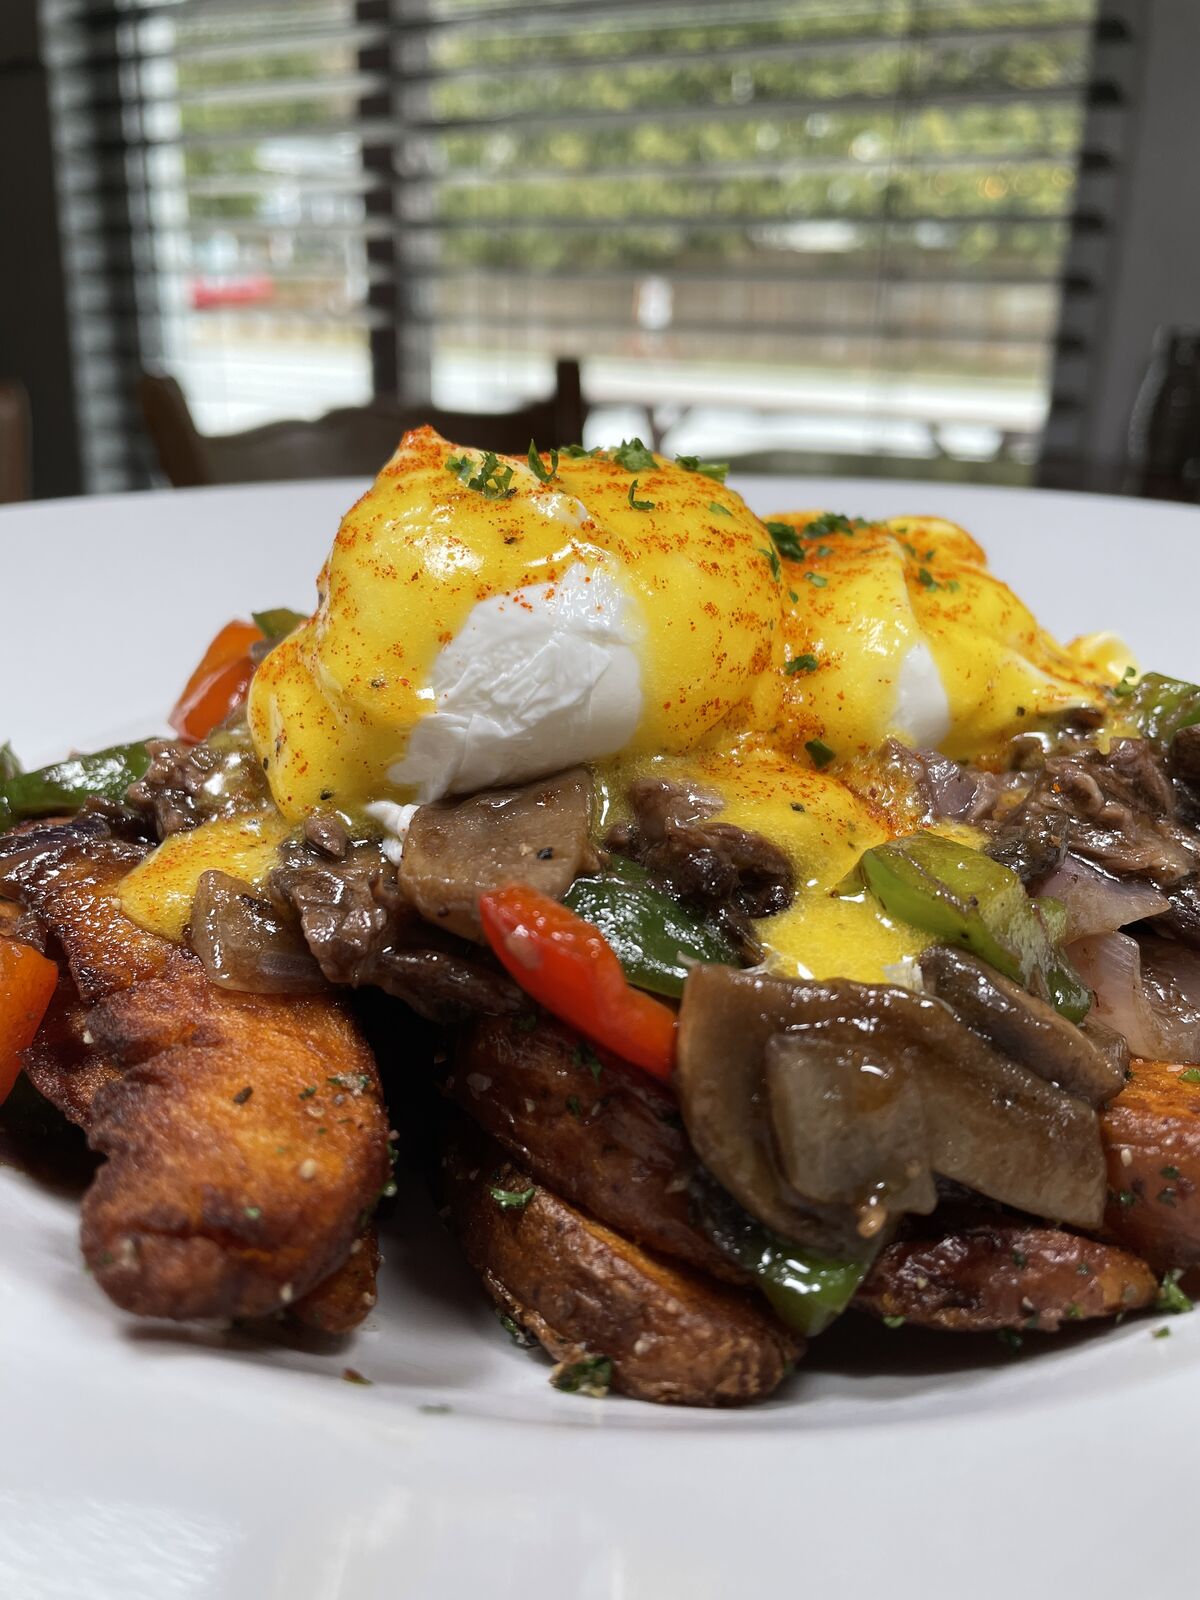 Weekend Special: Braised Beef Short Rib Hash | The Crabapple Café